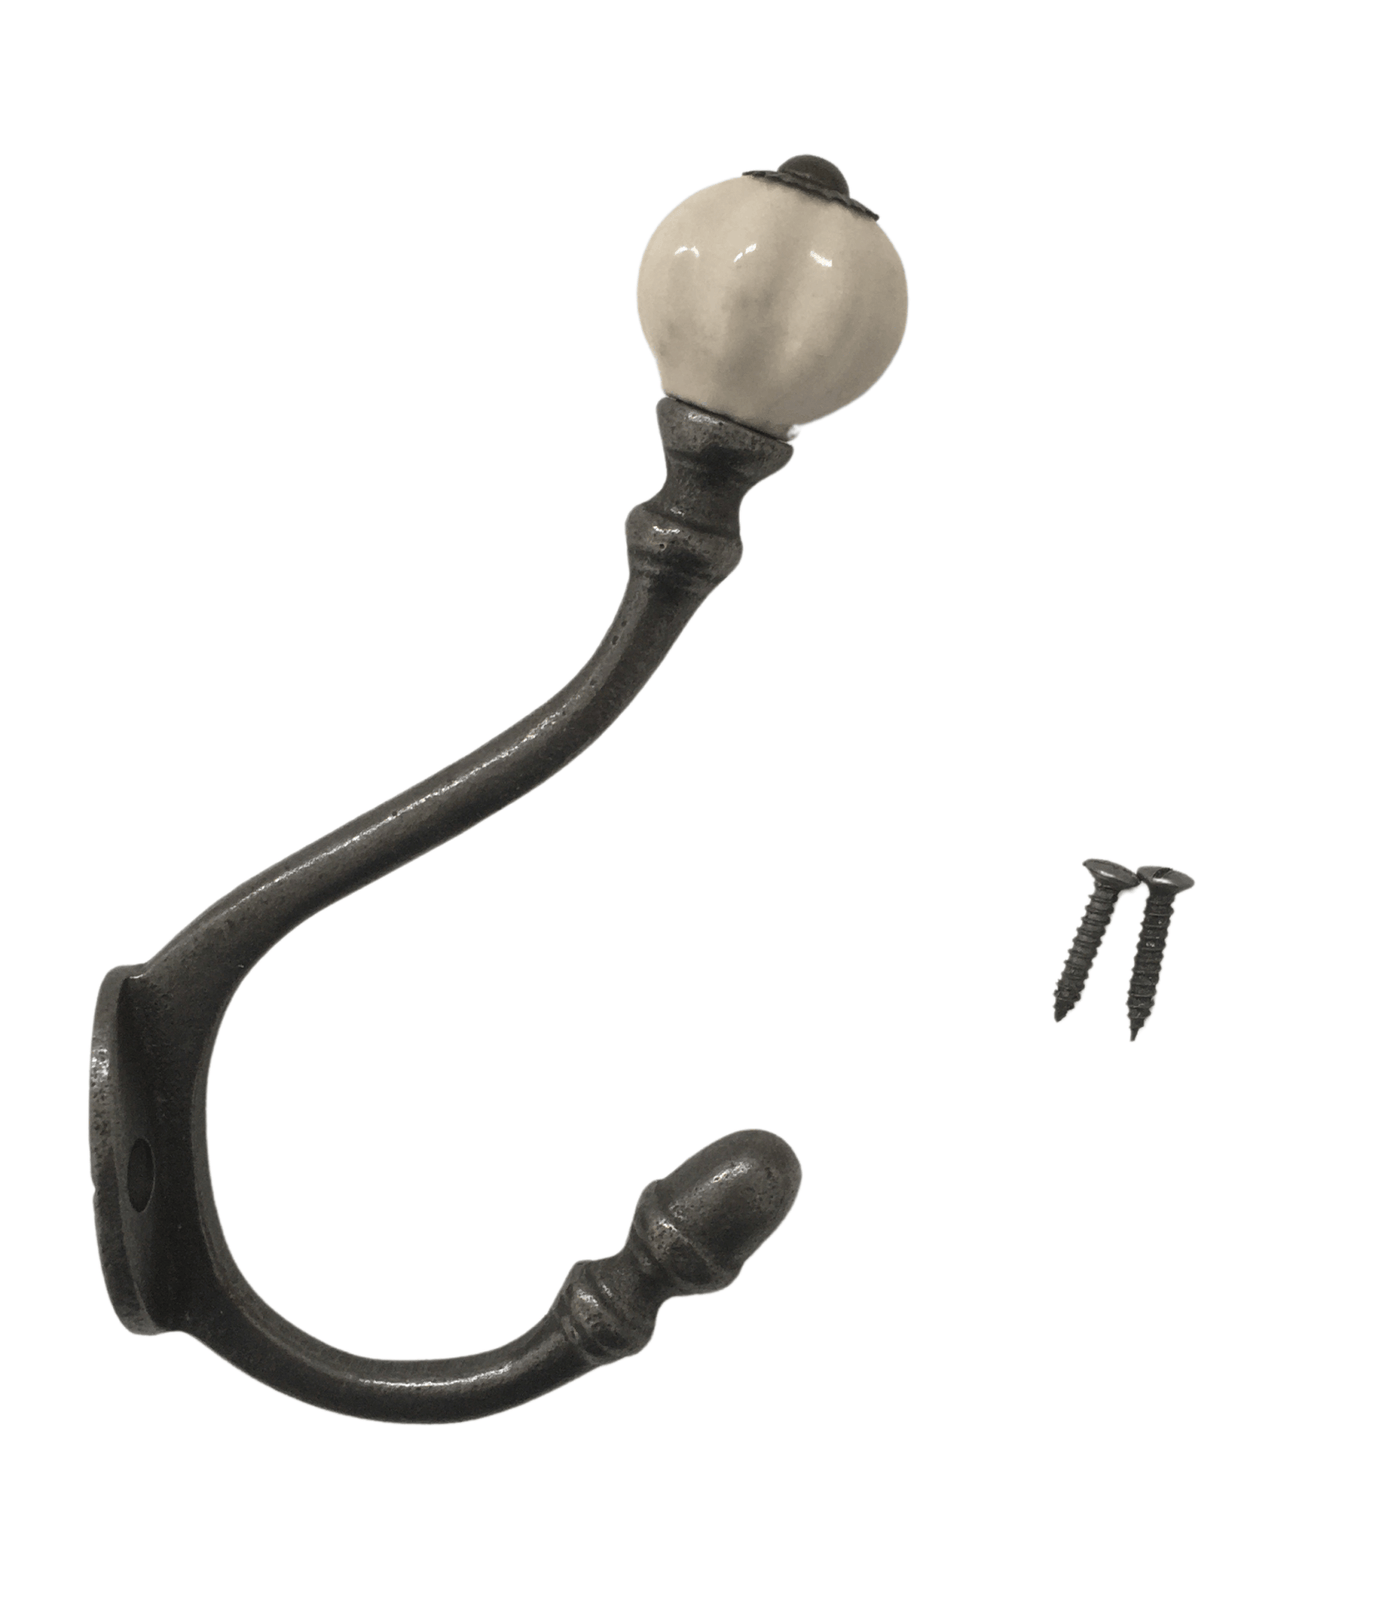 Cast Iron coat hook - ACORN STYLE with OFF WHITE CERAMIC TIP